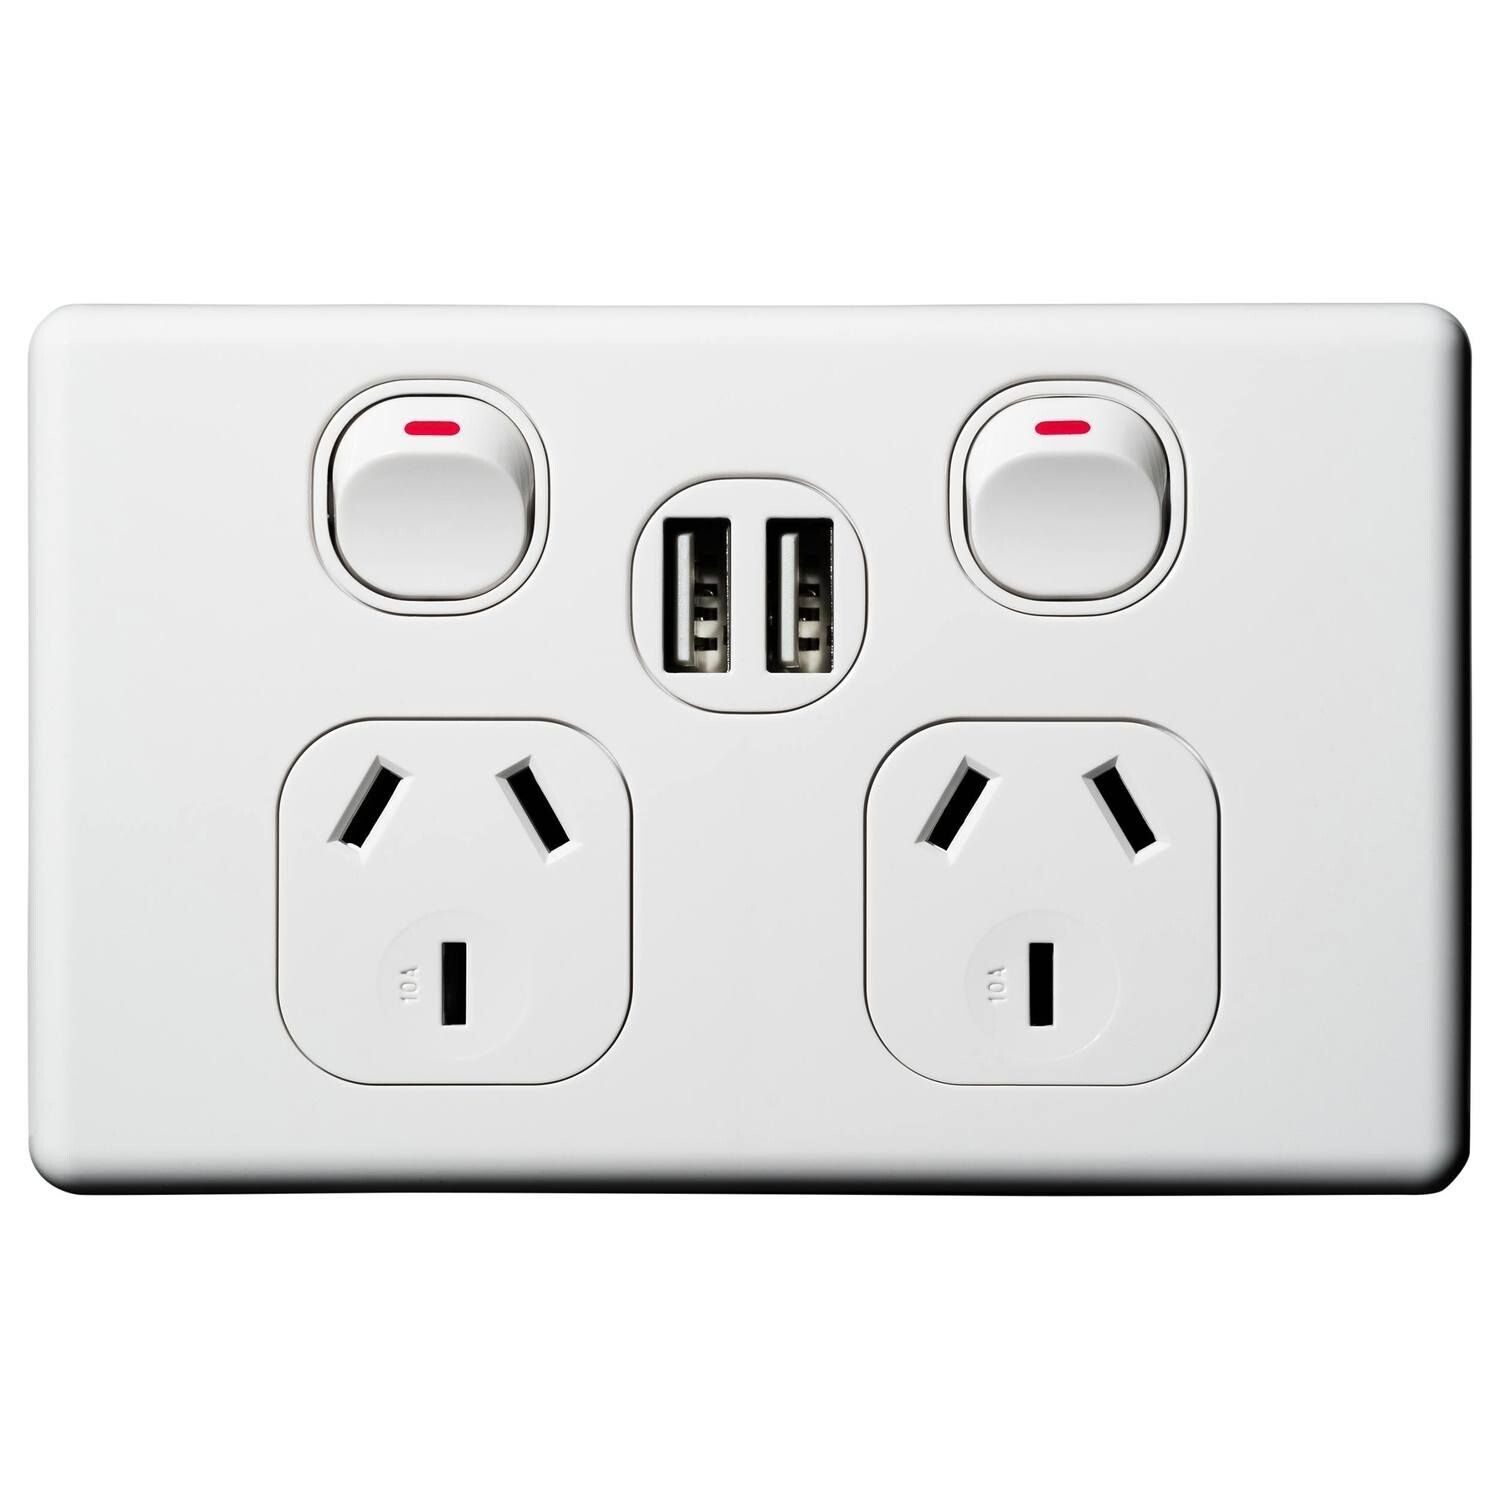 VX Classic Double Power Outlet 250v & 2 X 2.1a USB Outlet